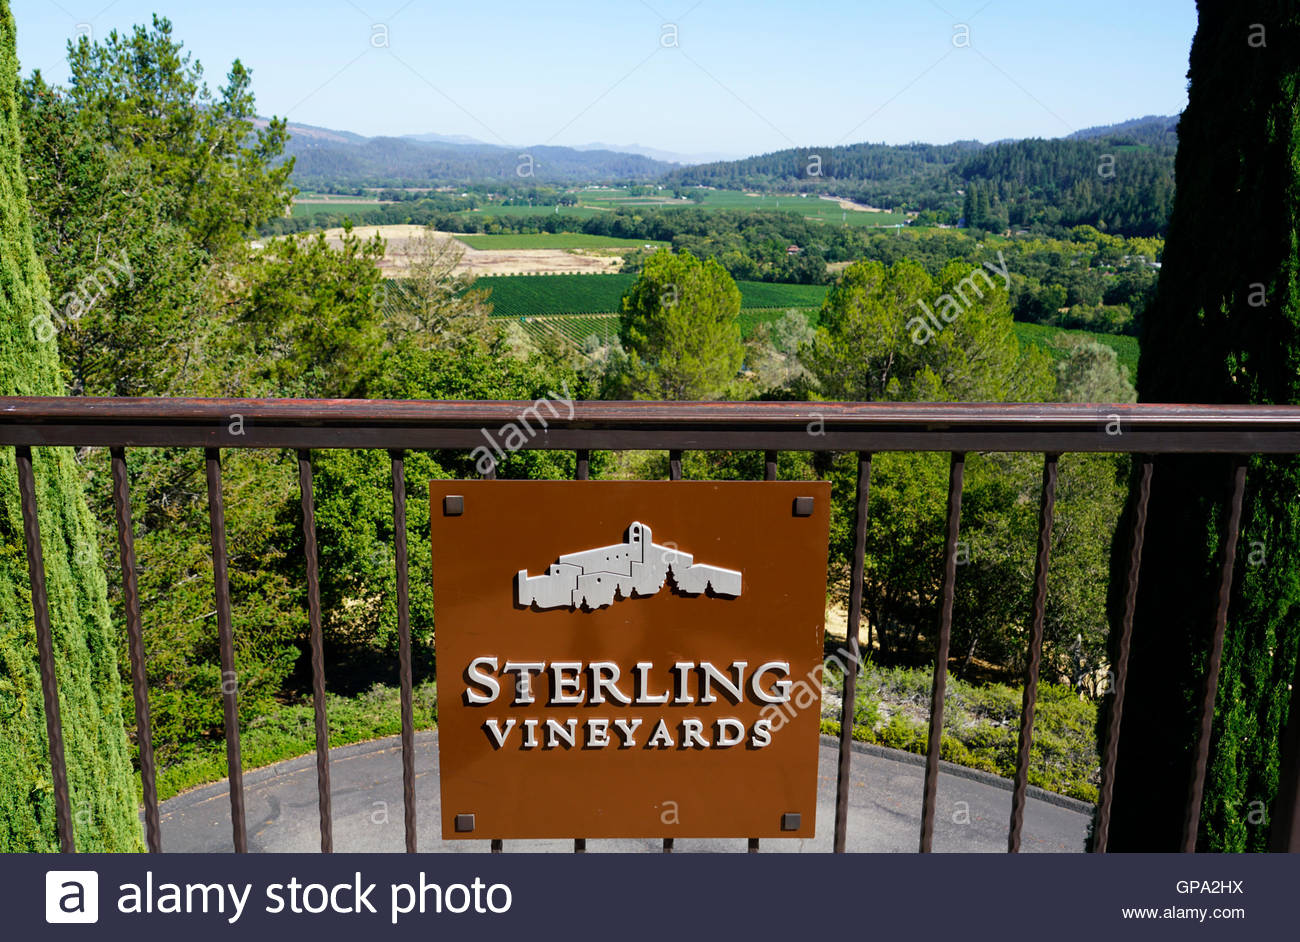 The Sign Of Sterling Vineyards Winery With Napa Valley